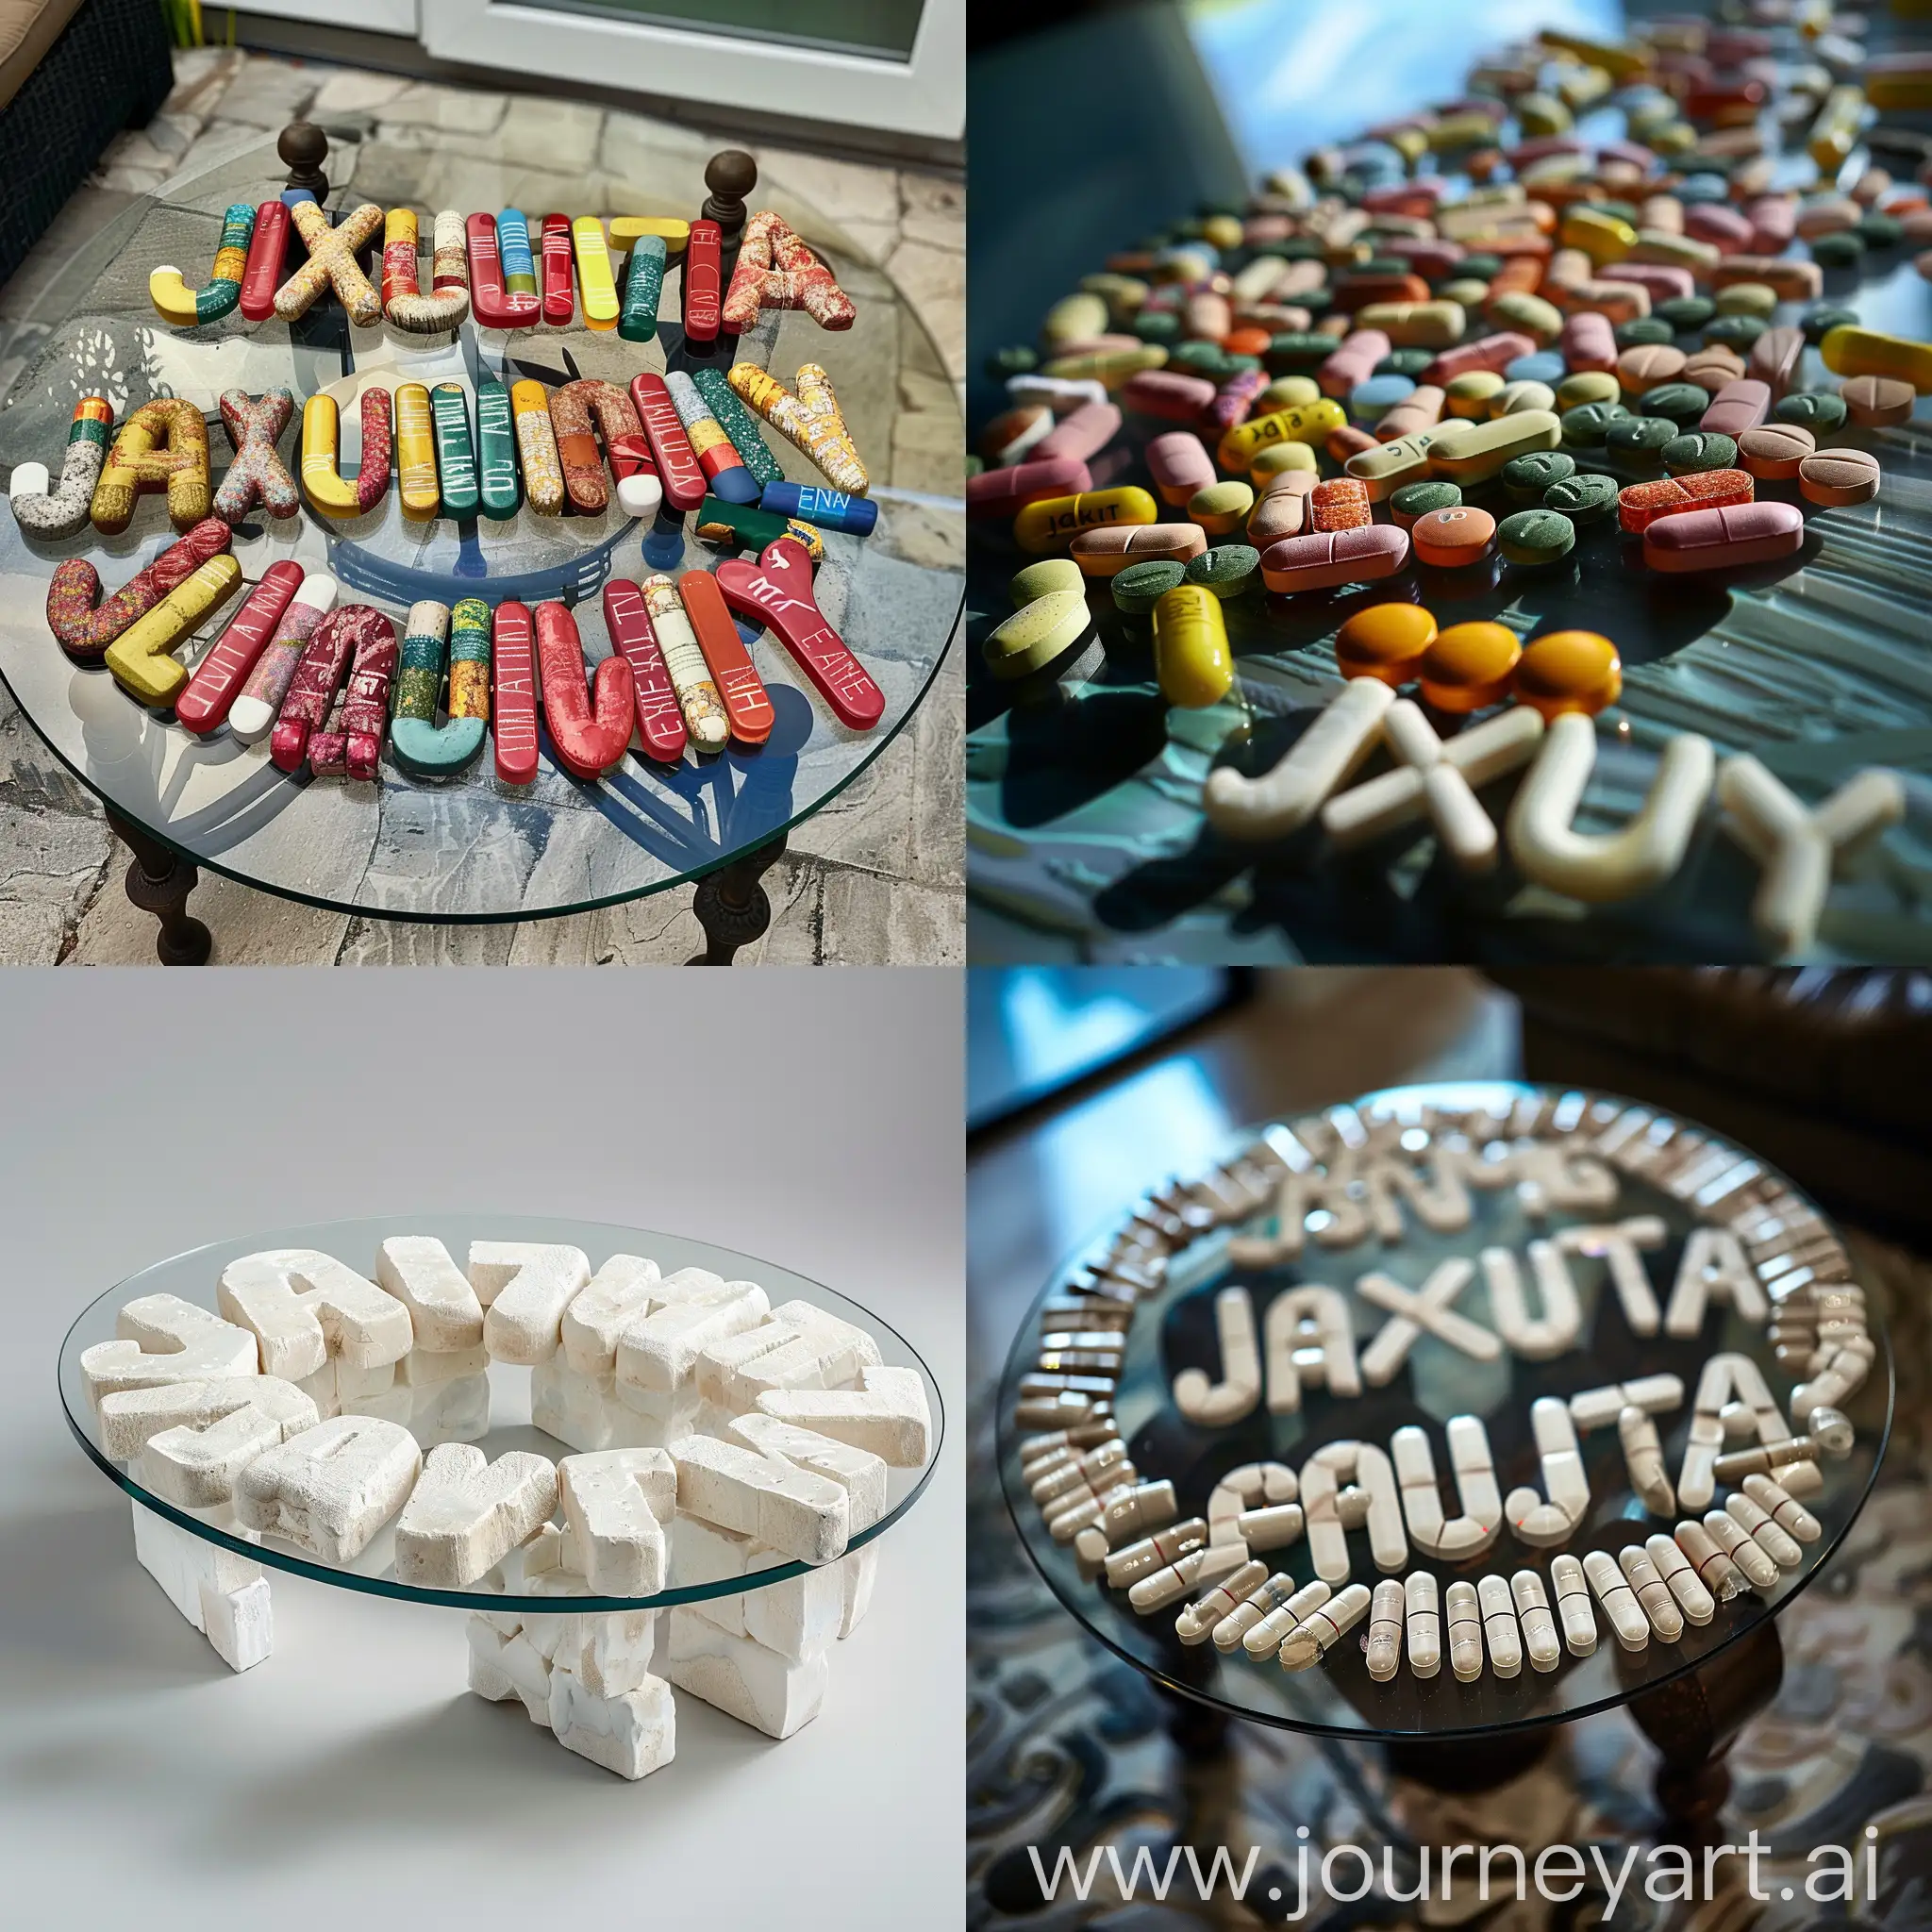 The word "jakuta family" was laid out on a glass table made of tablets